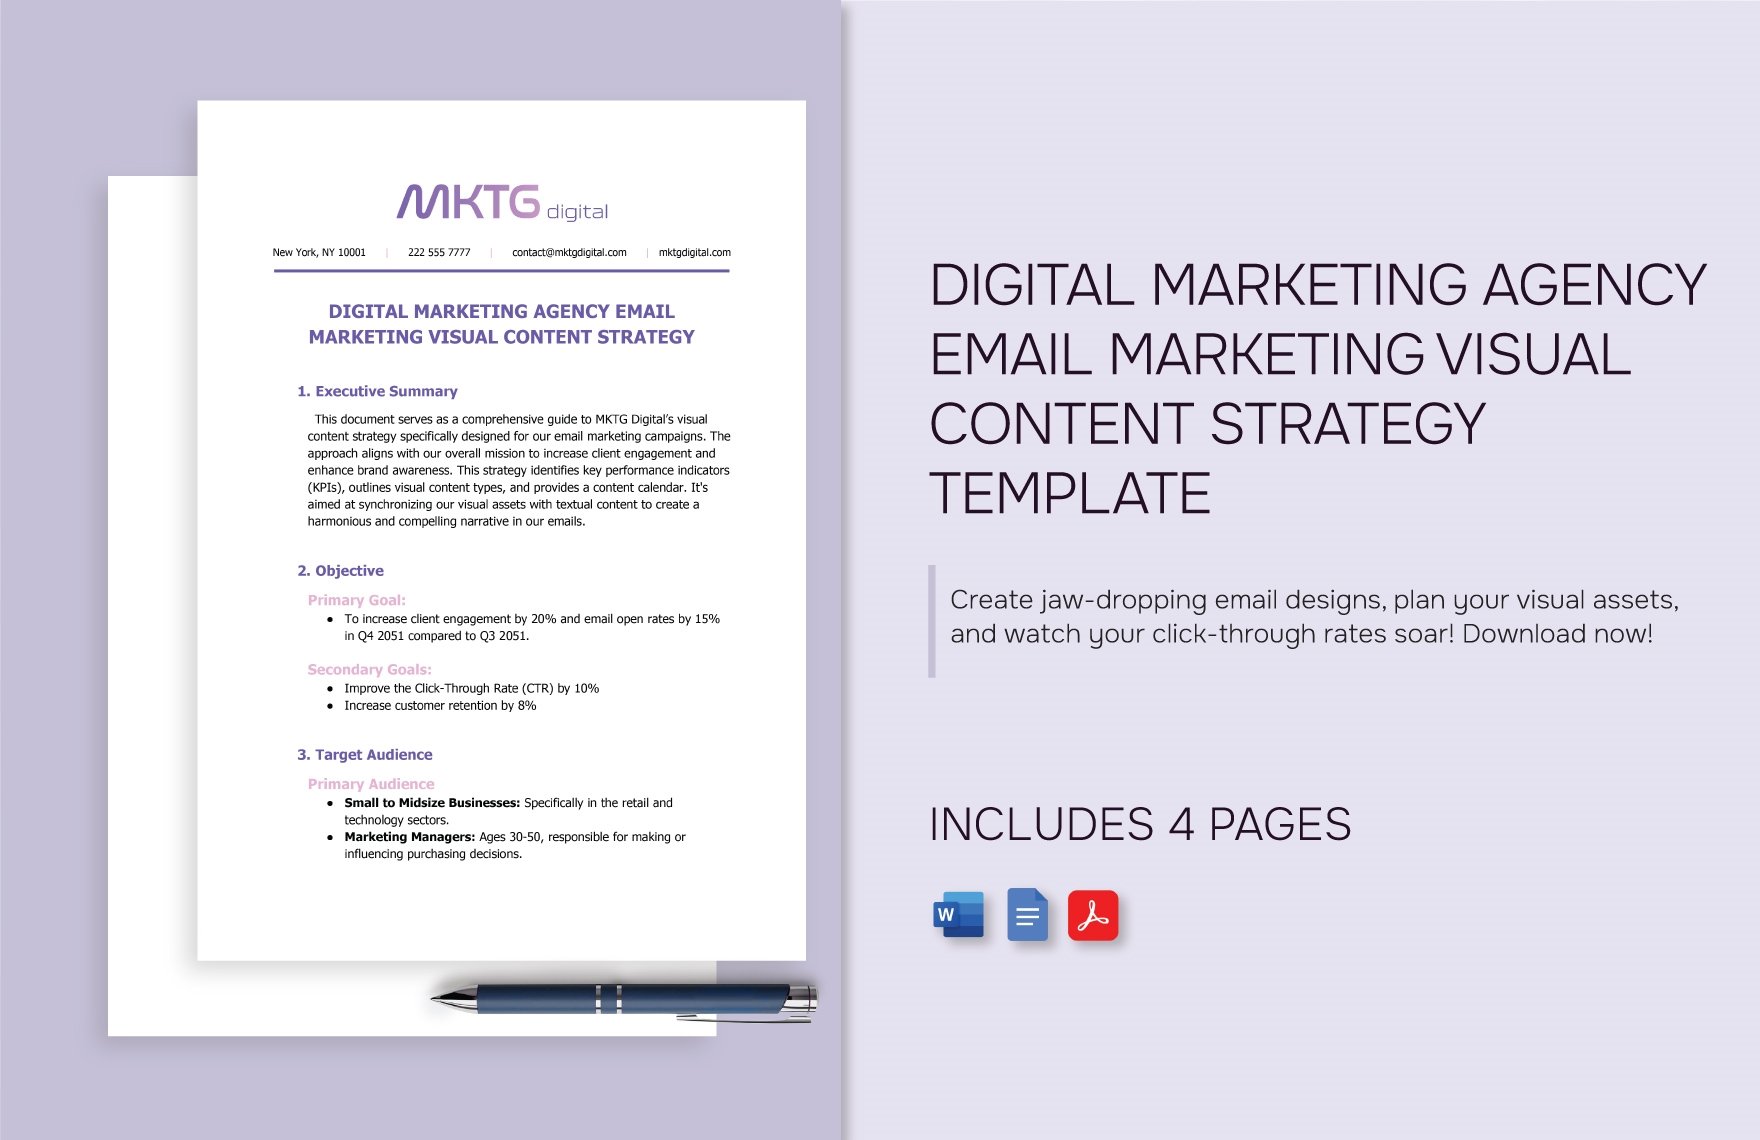 Digital Marketing Agency Email Marketing Visual Content Strategy Template